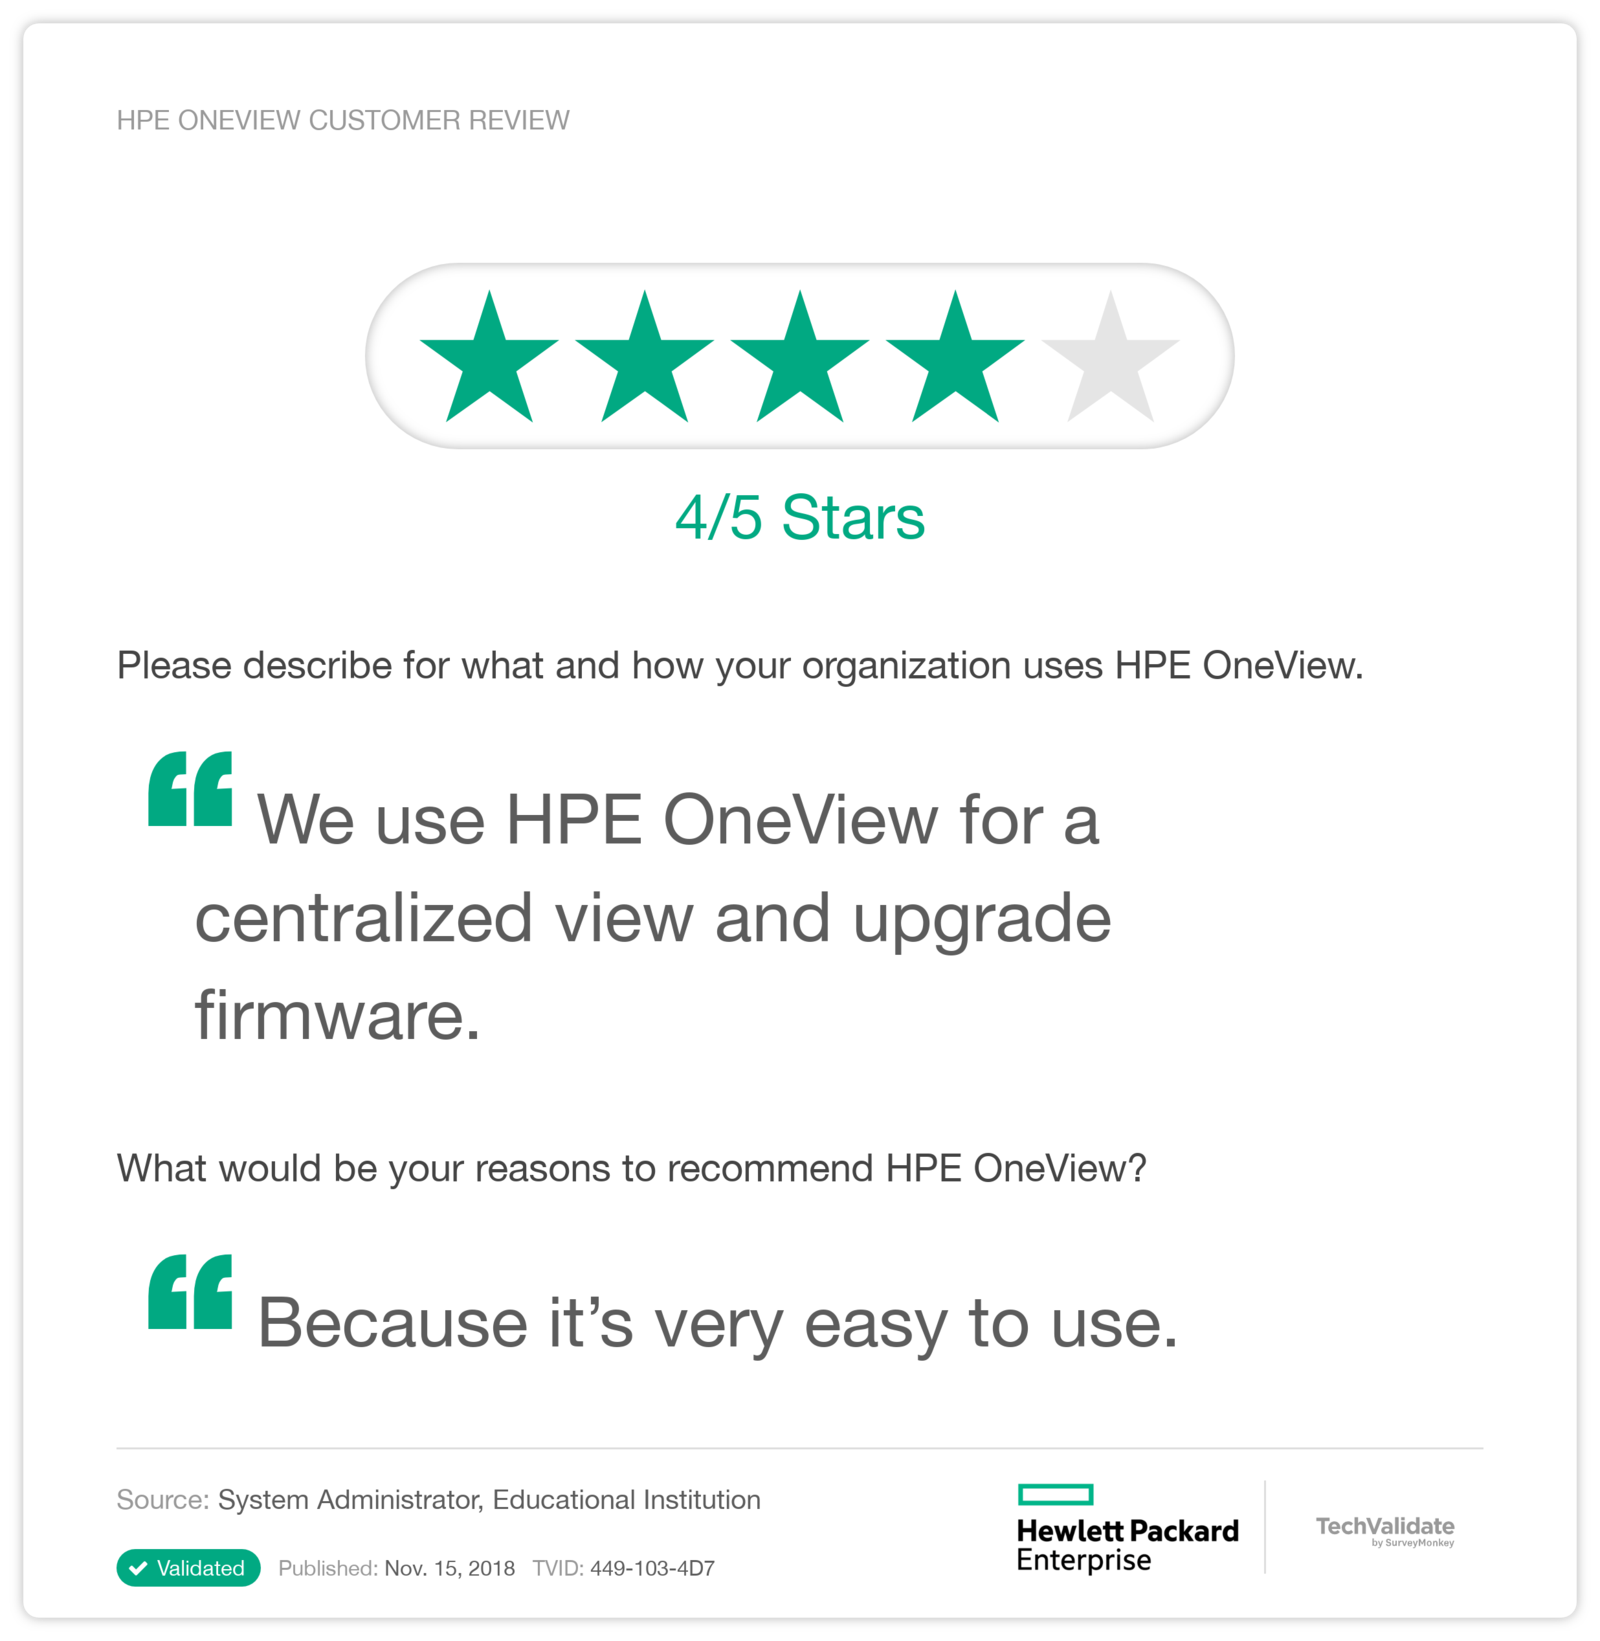 HPE OneView Customer Review